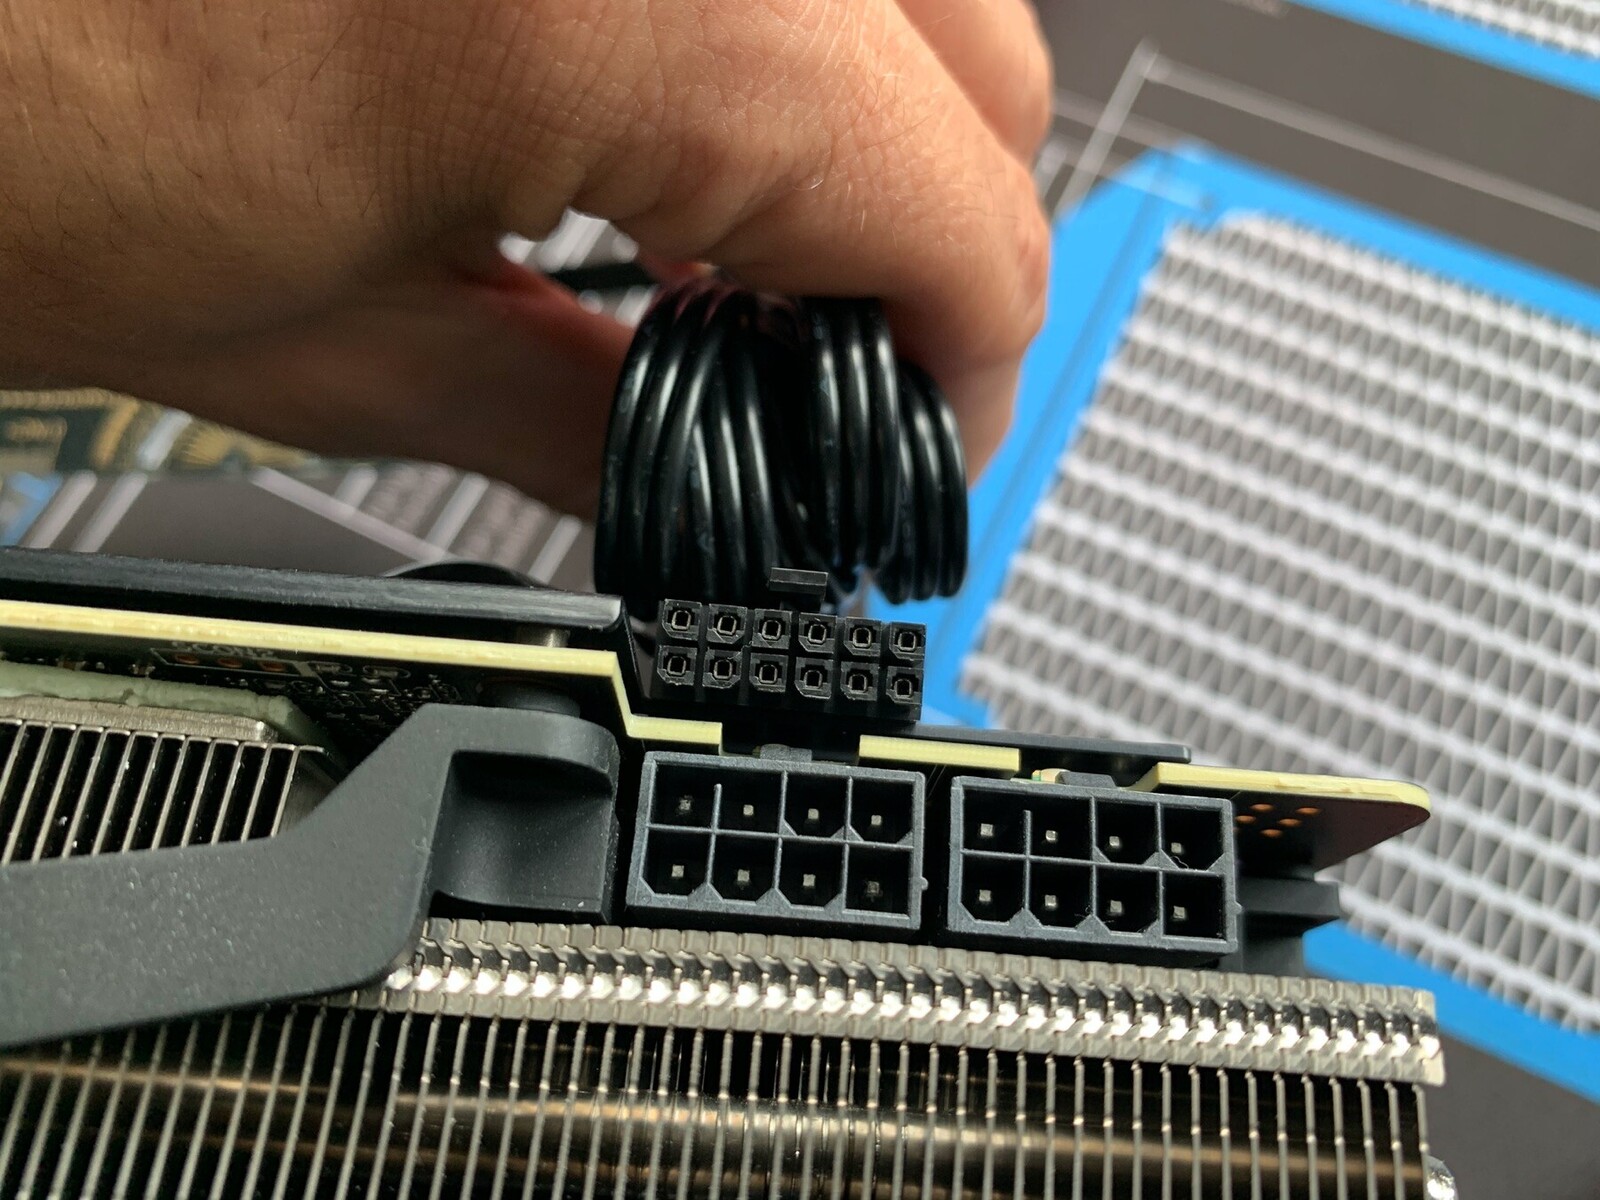 NVIDIA's new 12-pin power connector for RTX 3000 cards is spotted in the  wild - NotebookCheck.net News